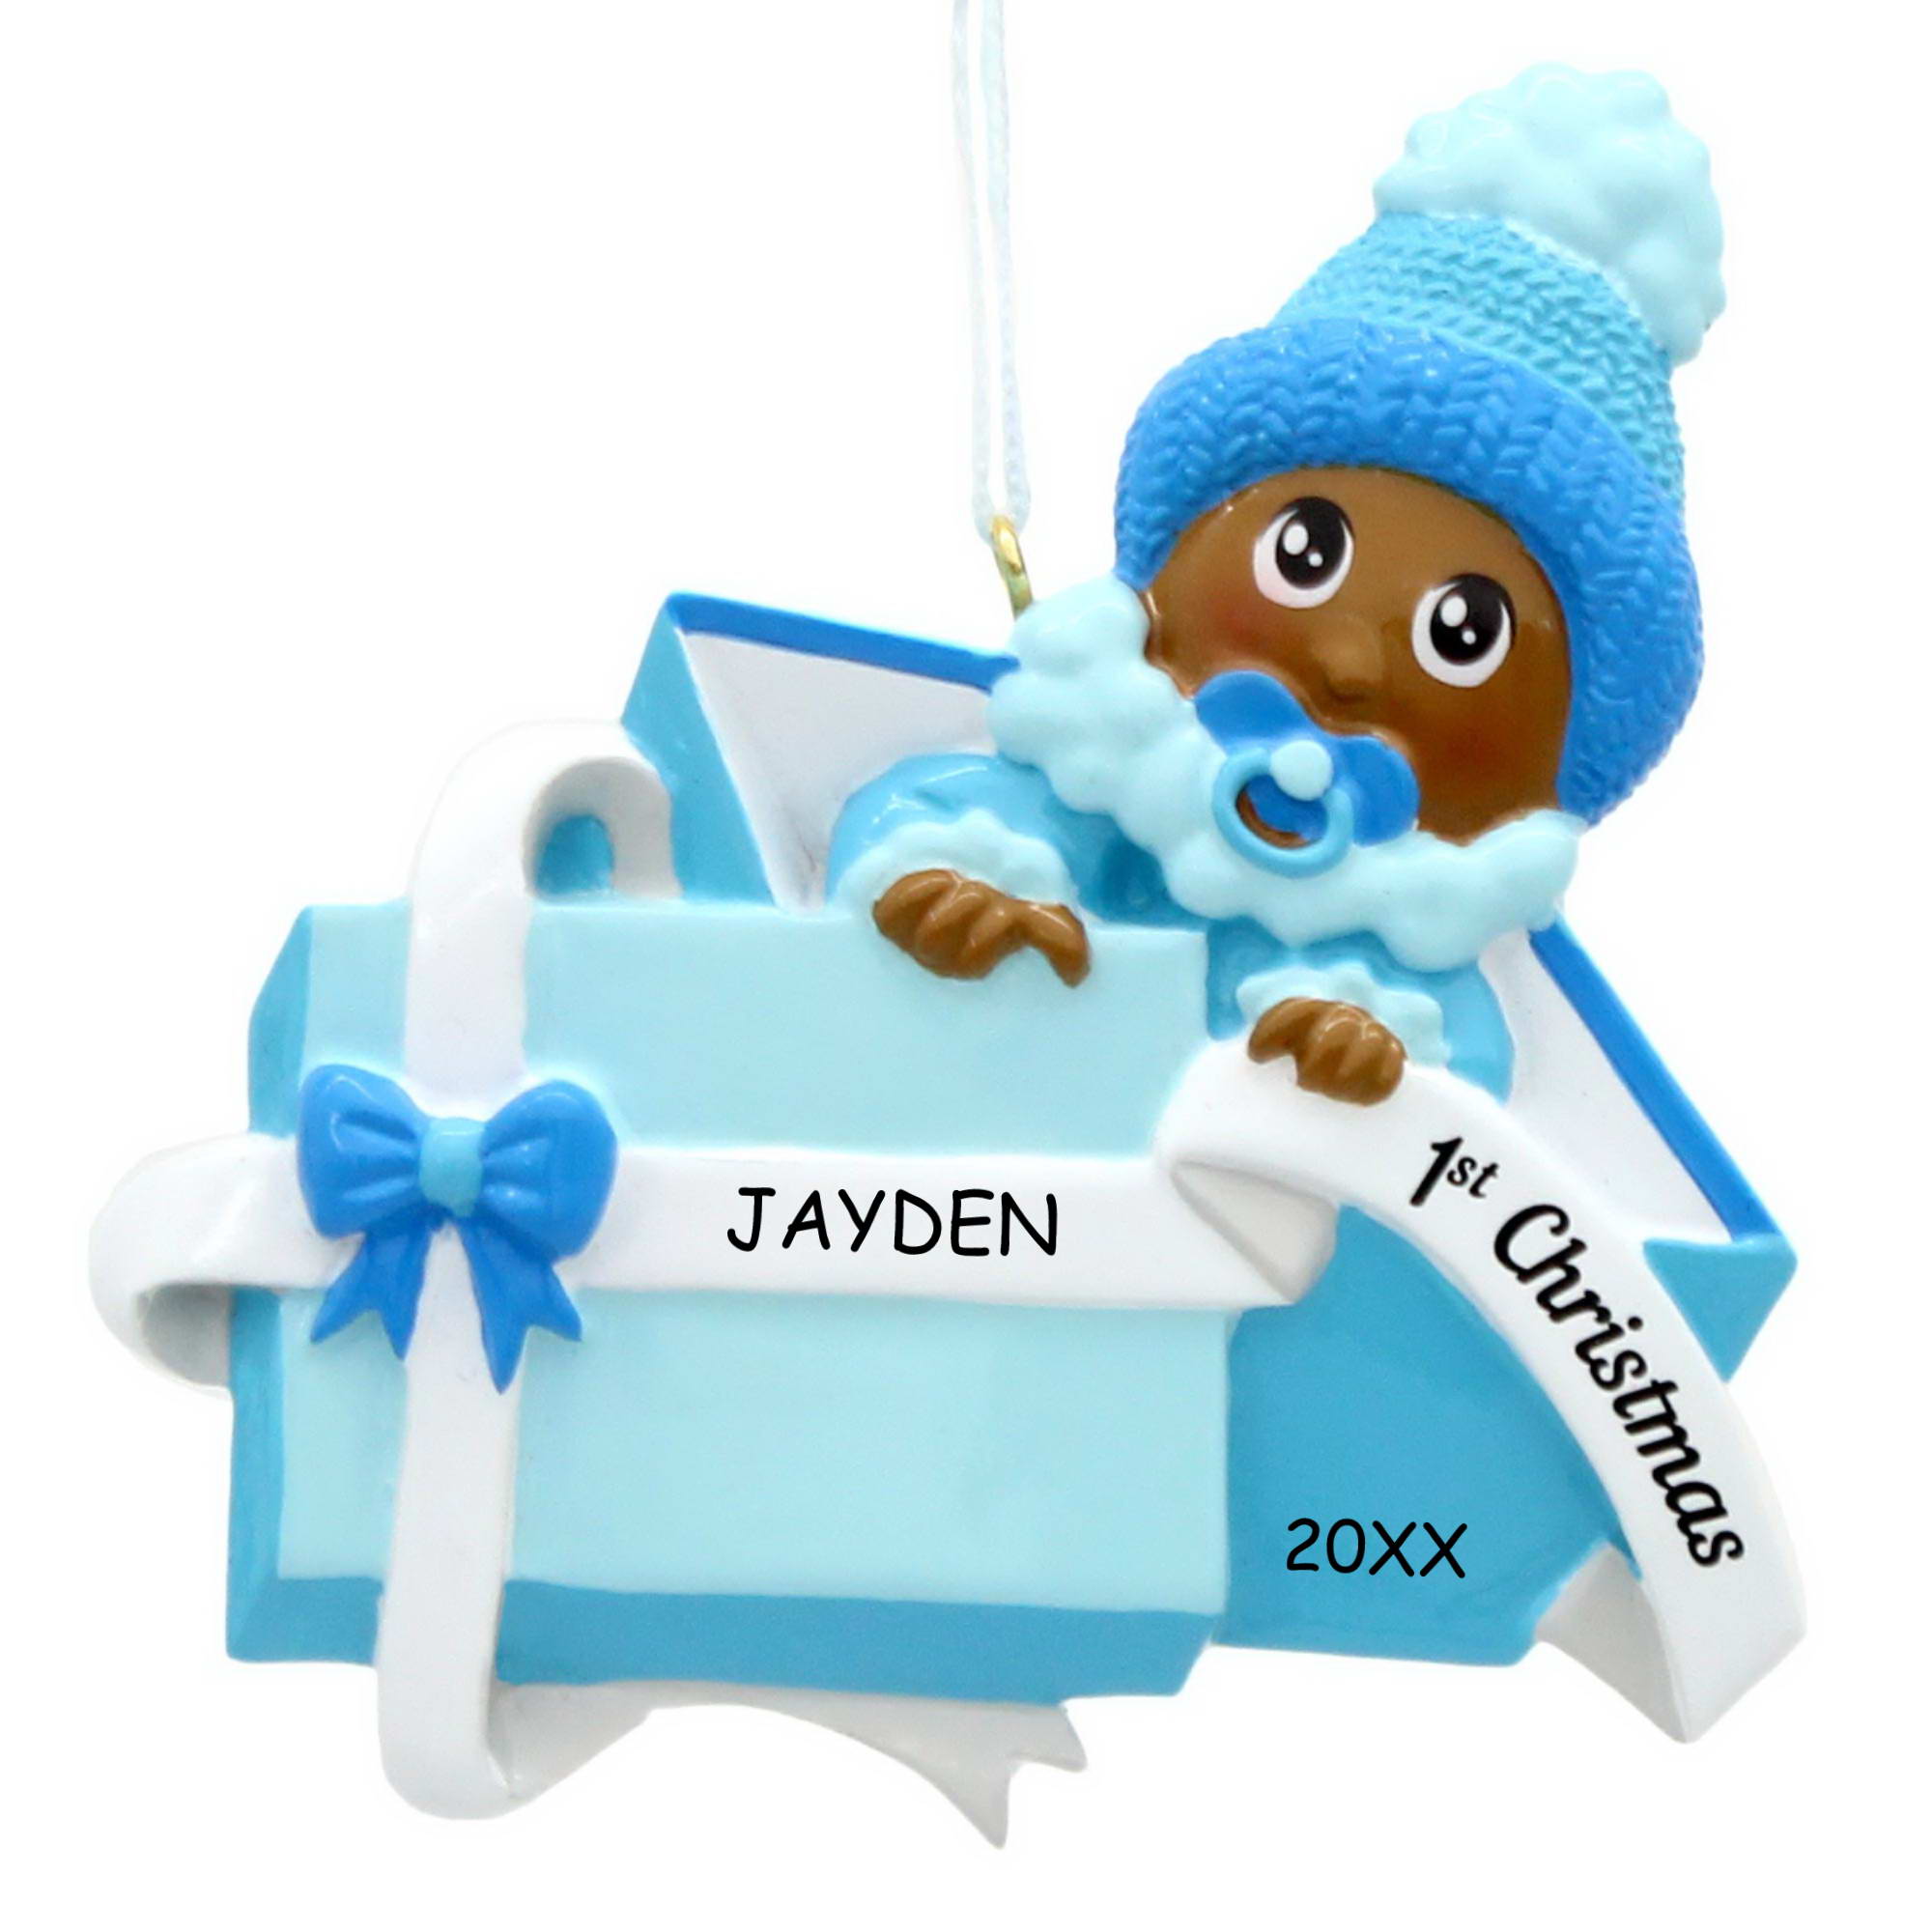 Personalized Baby Boy in a Present First Christmas Ornament - Dark Skin Tone